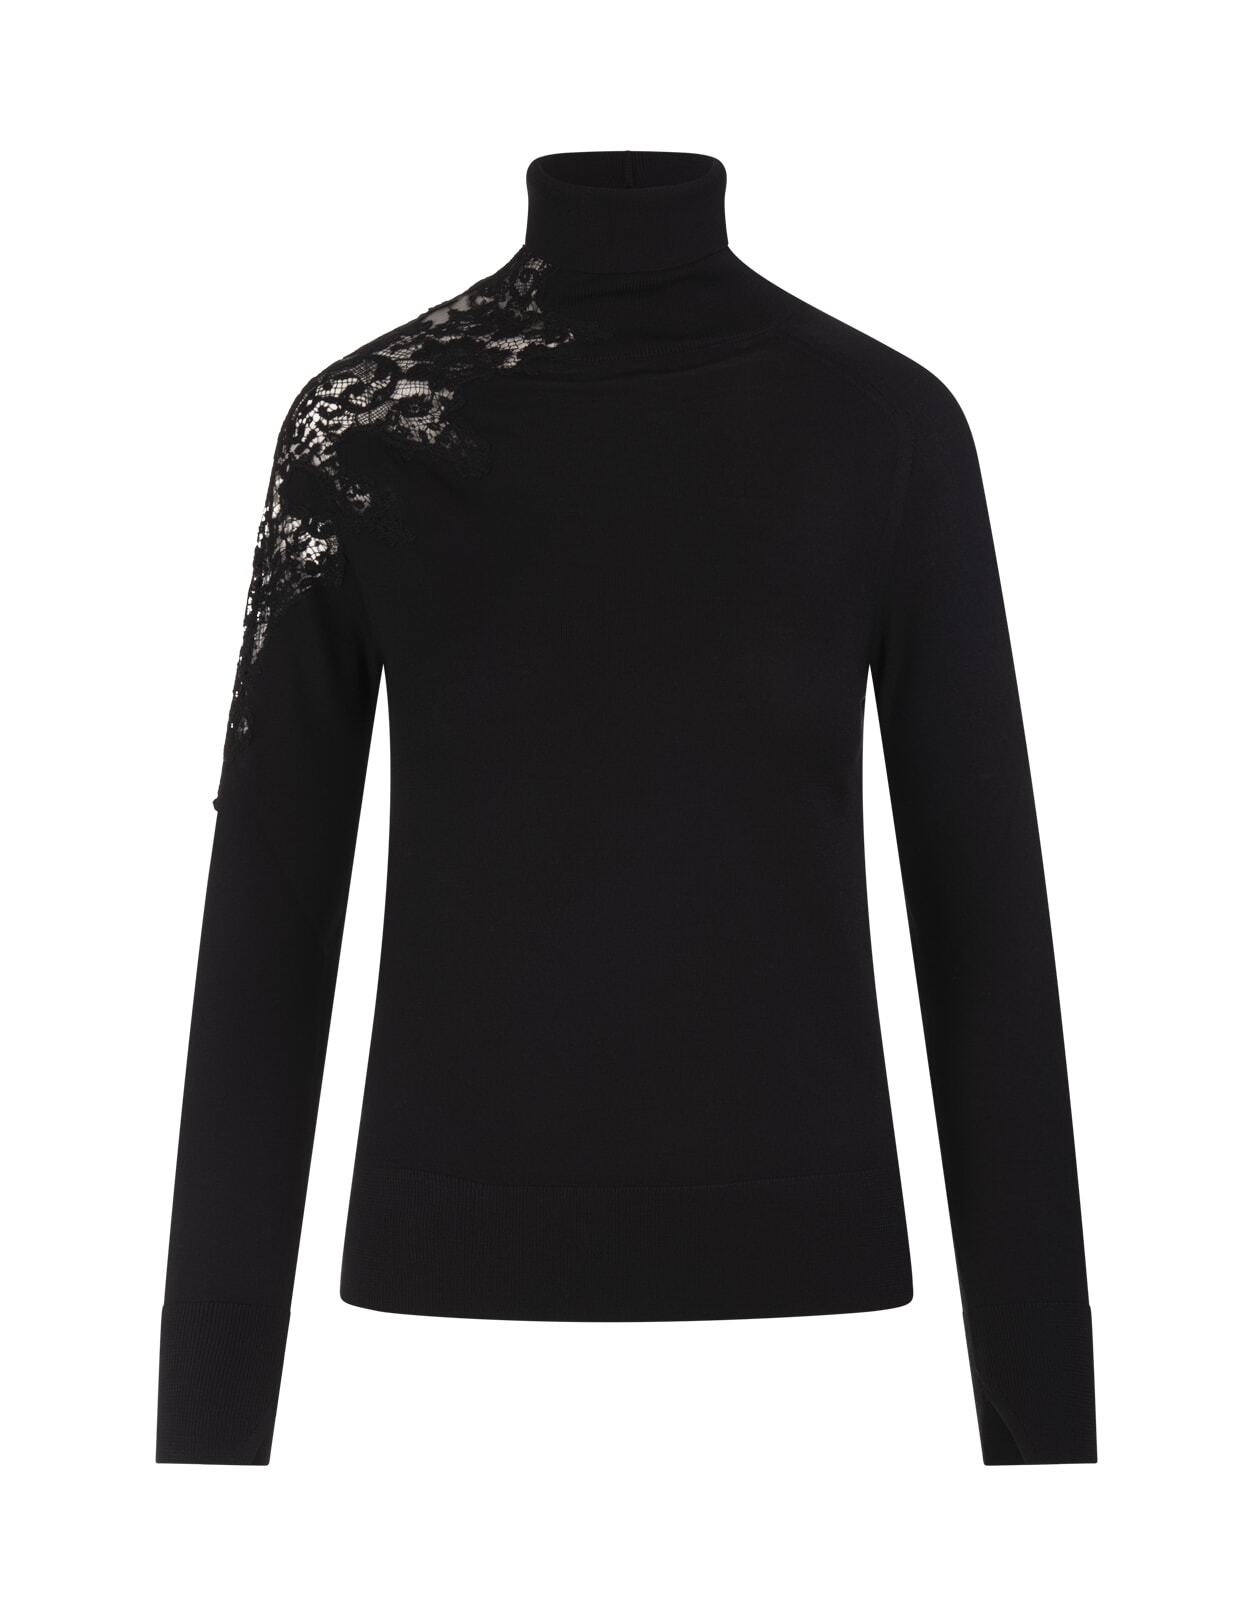 Ermanno Scervino Black Wool Turtleneck With Lace in nero